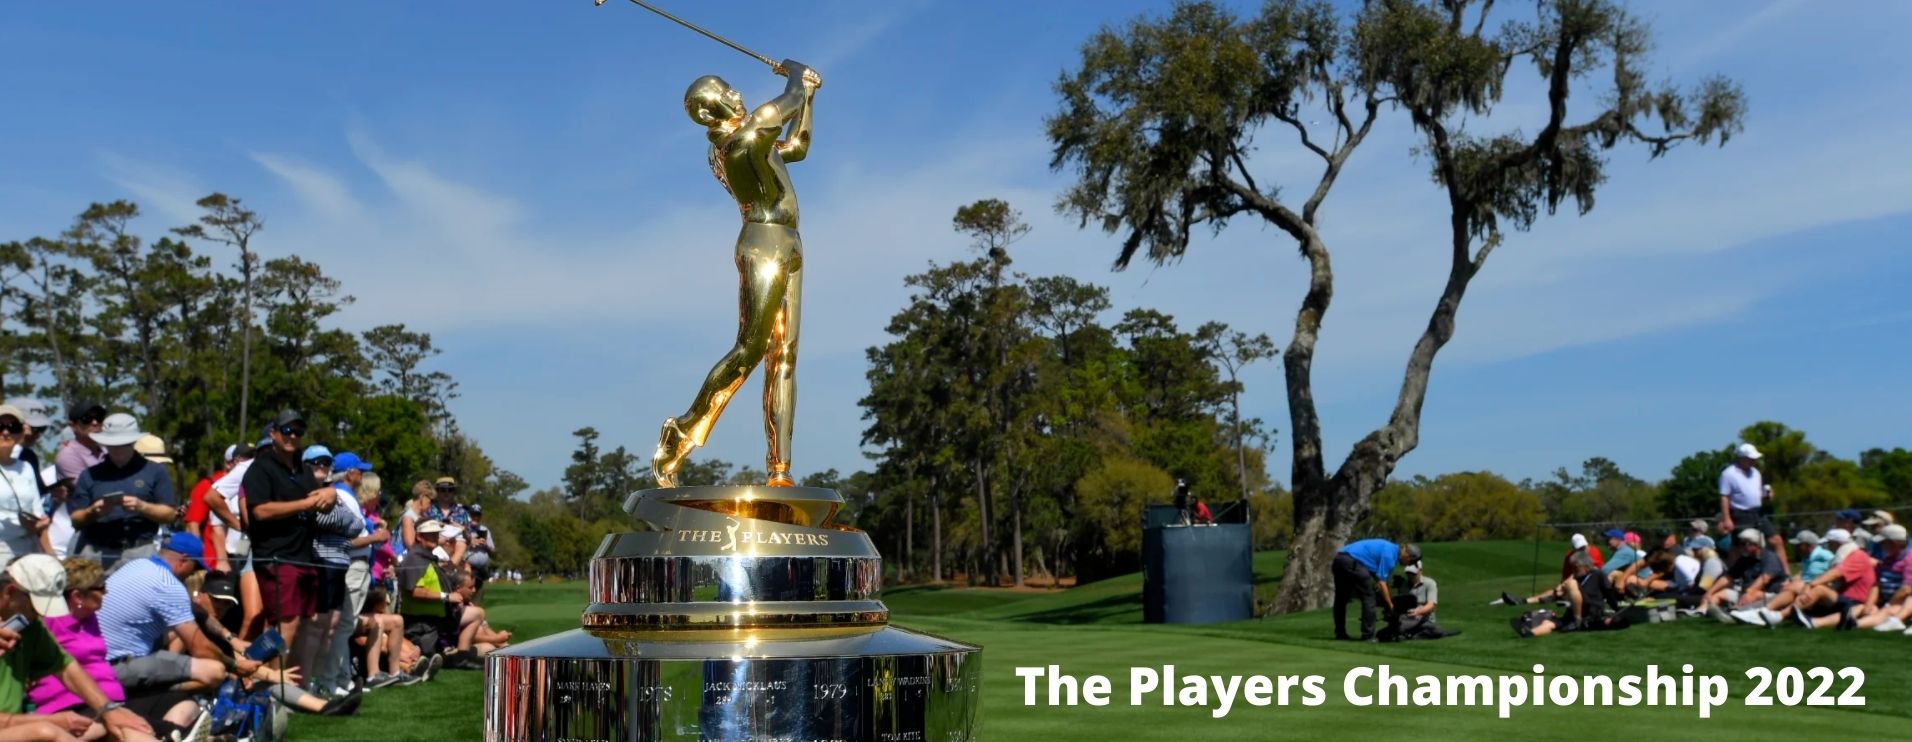 Golf The Players Championship 2022 PGA Tour: Schedule, How to Watch, Tickets